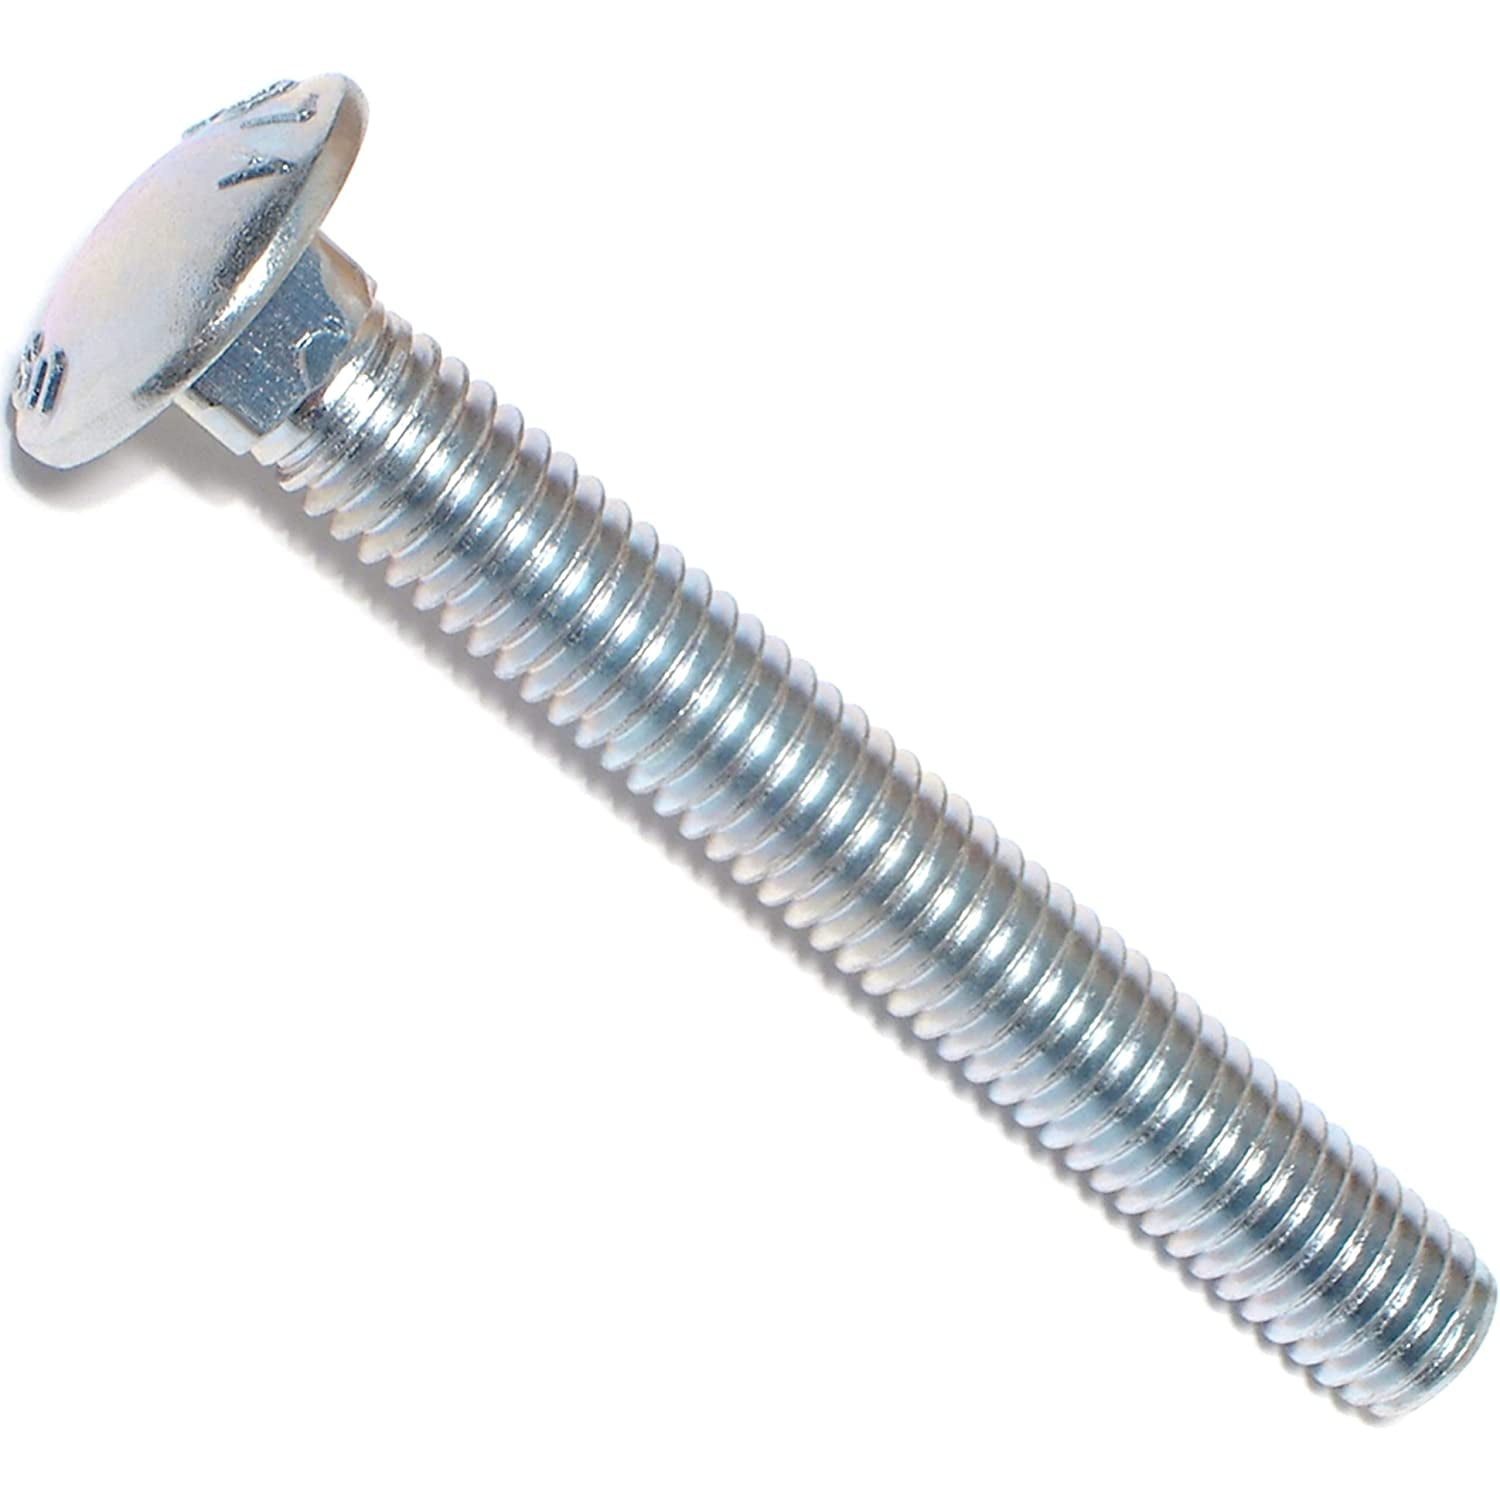 Hard-to-Find Fastener 014973485993 Carriage Bolts Piece-50 3/8-16 x 9